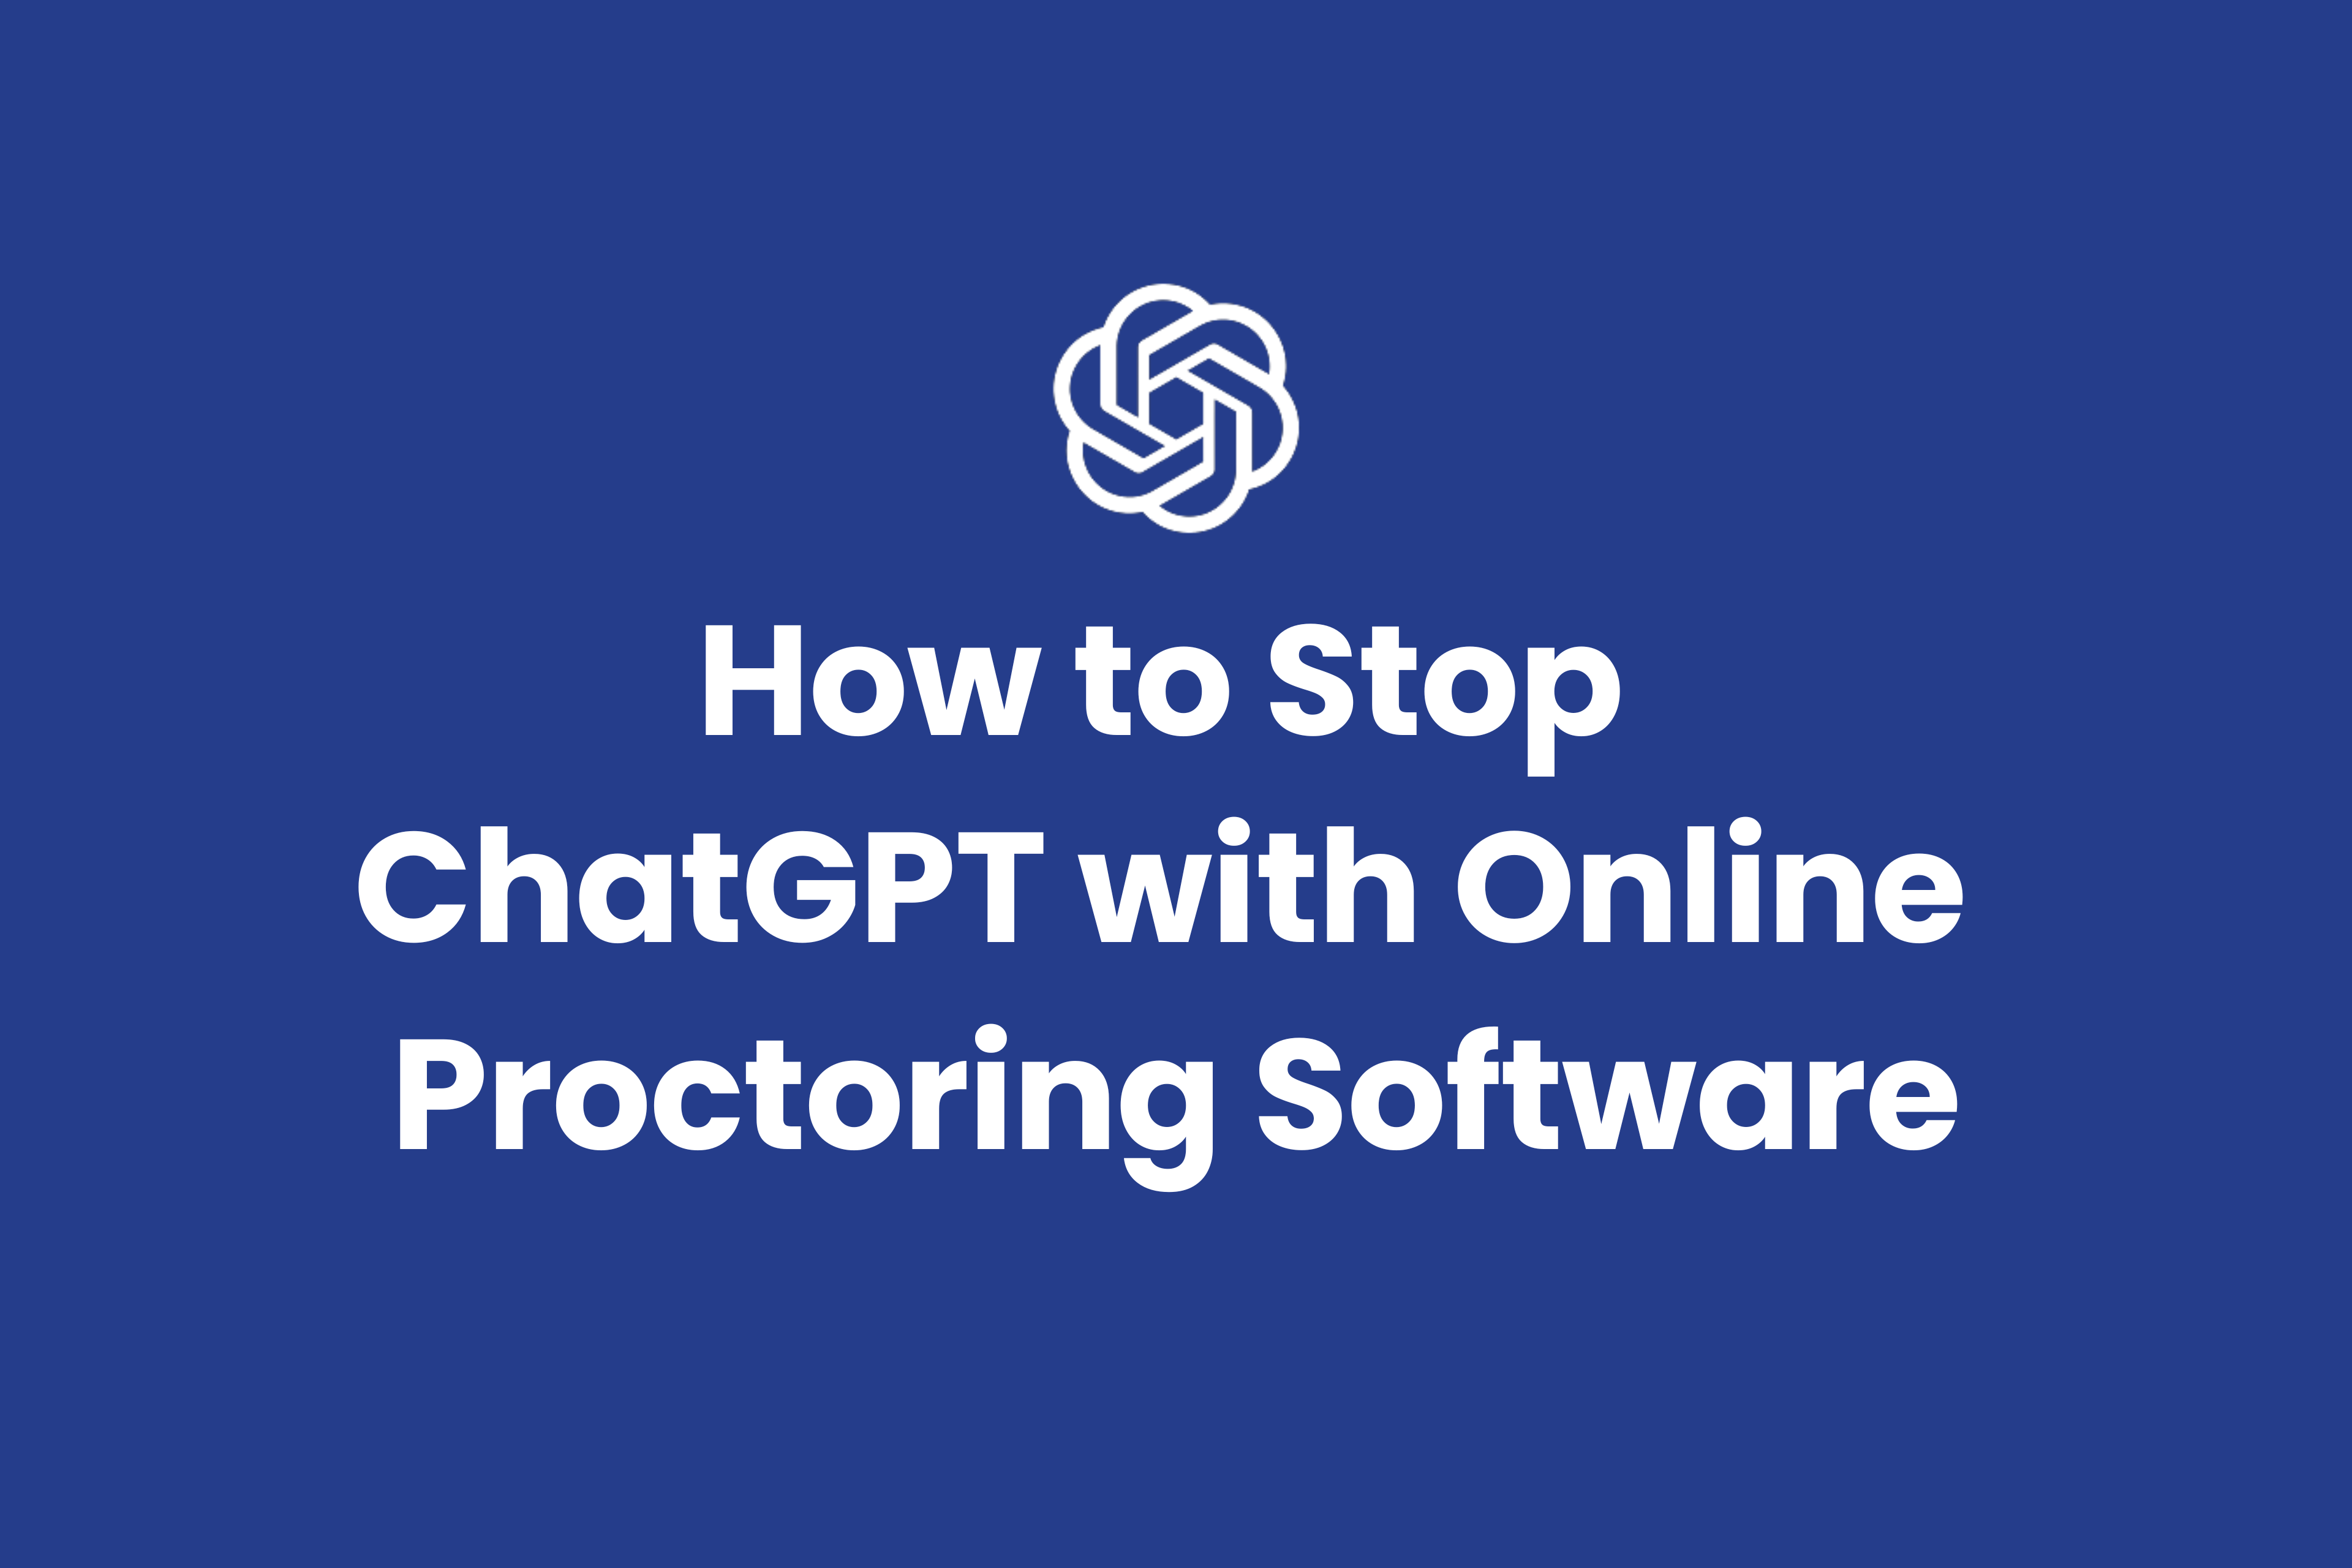 Using online proctoring services to stop students from cheating with ChatGPT